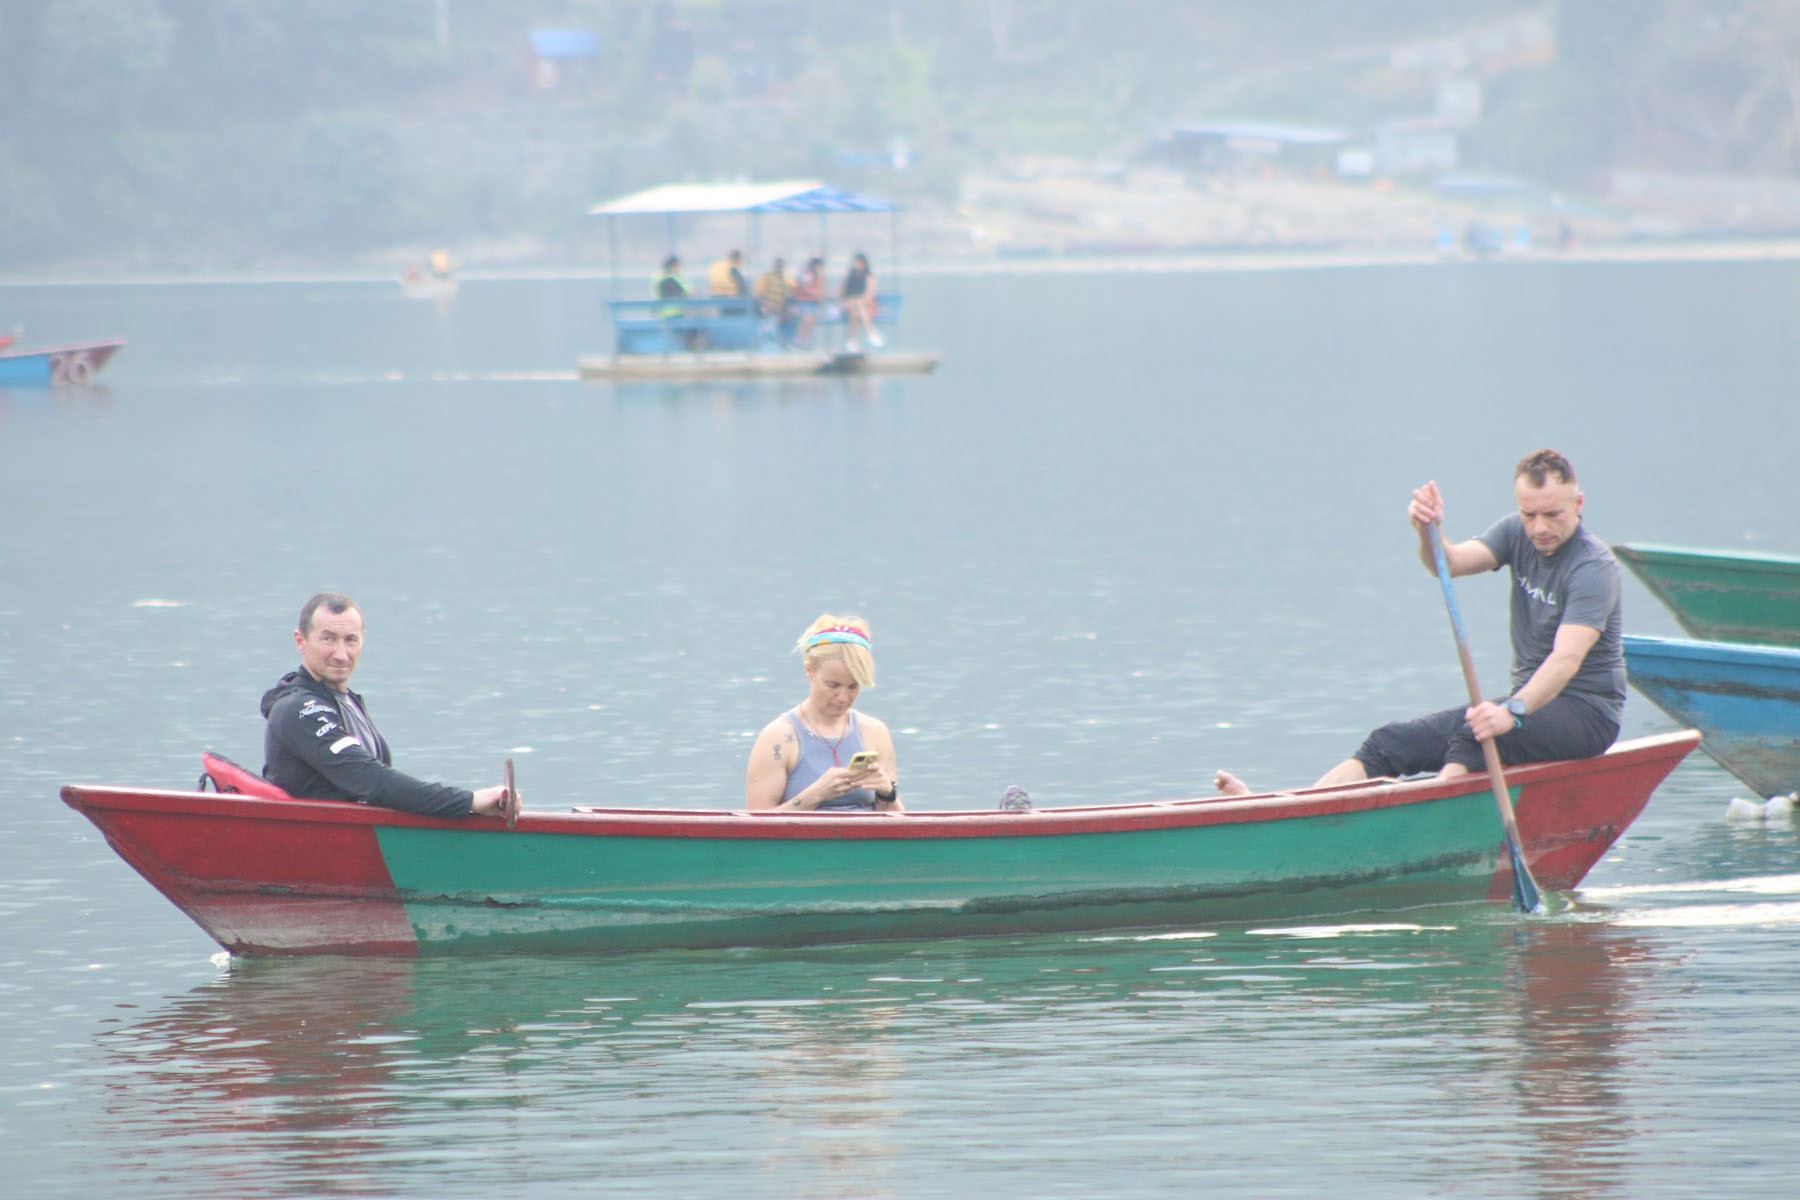 'Passport to Pokhara' offer mooted to attract domestic tourists